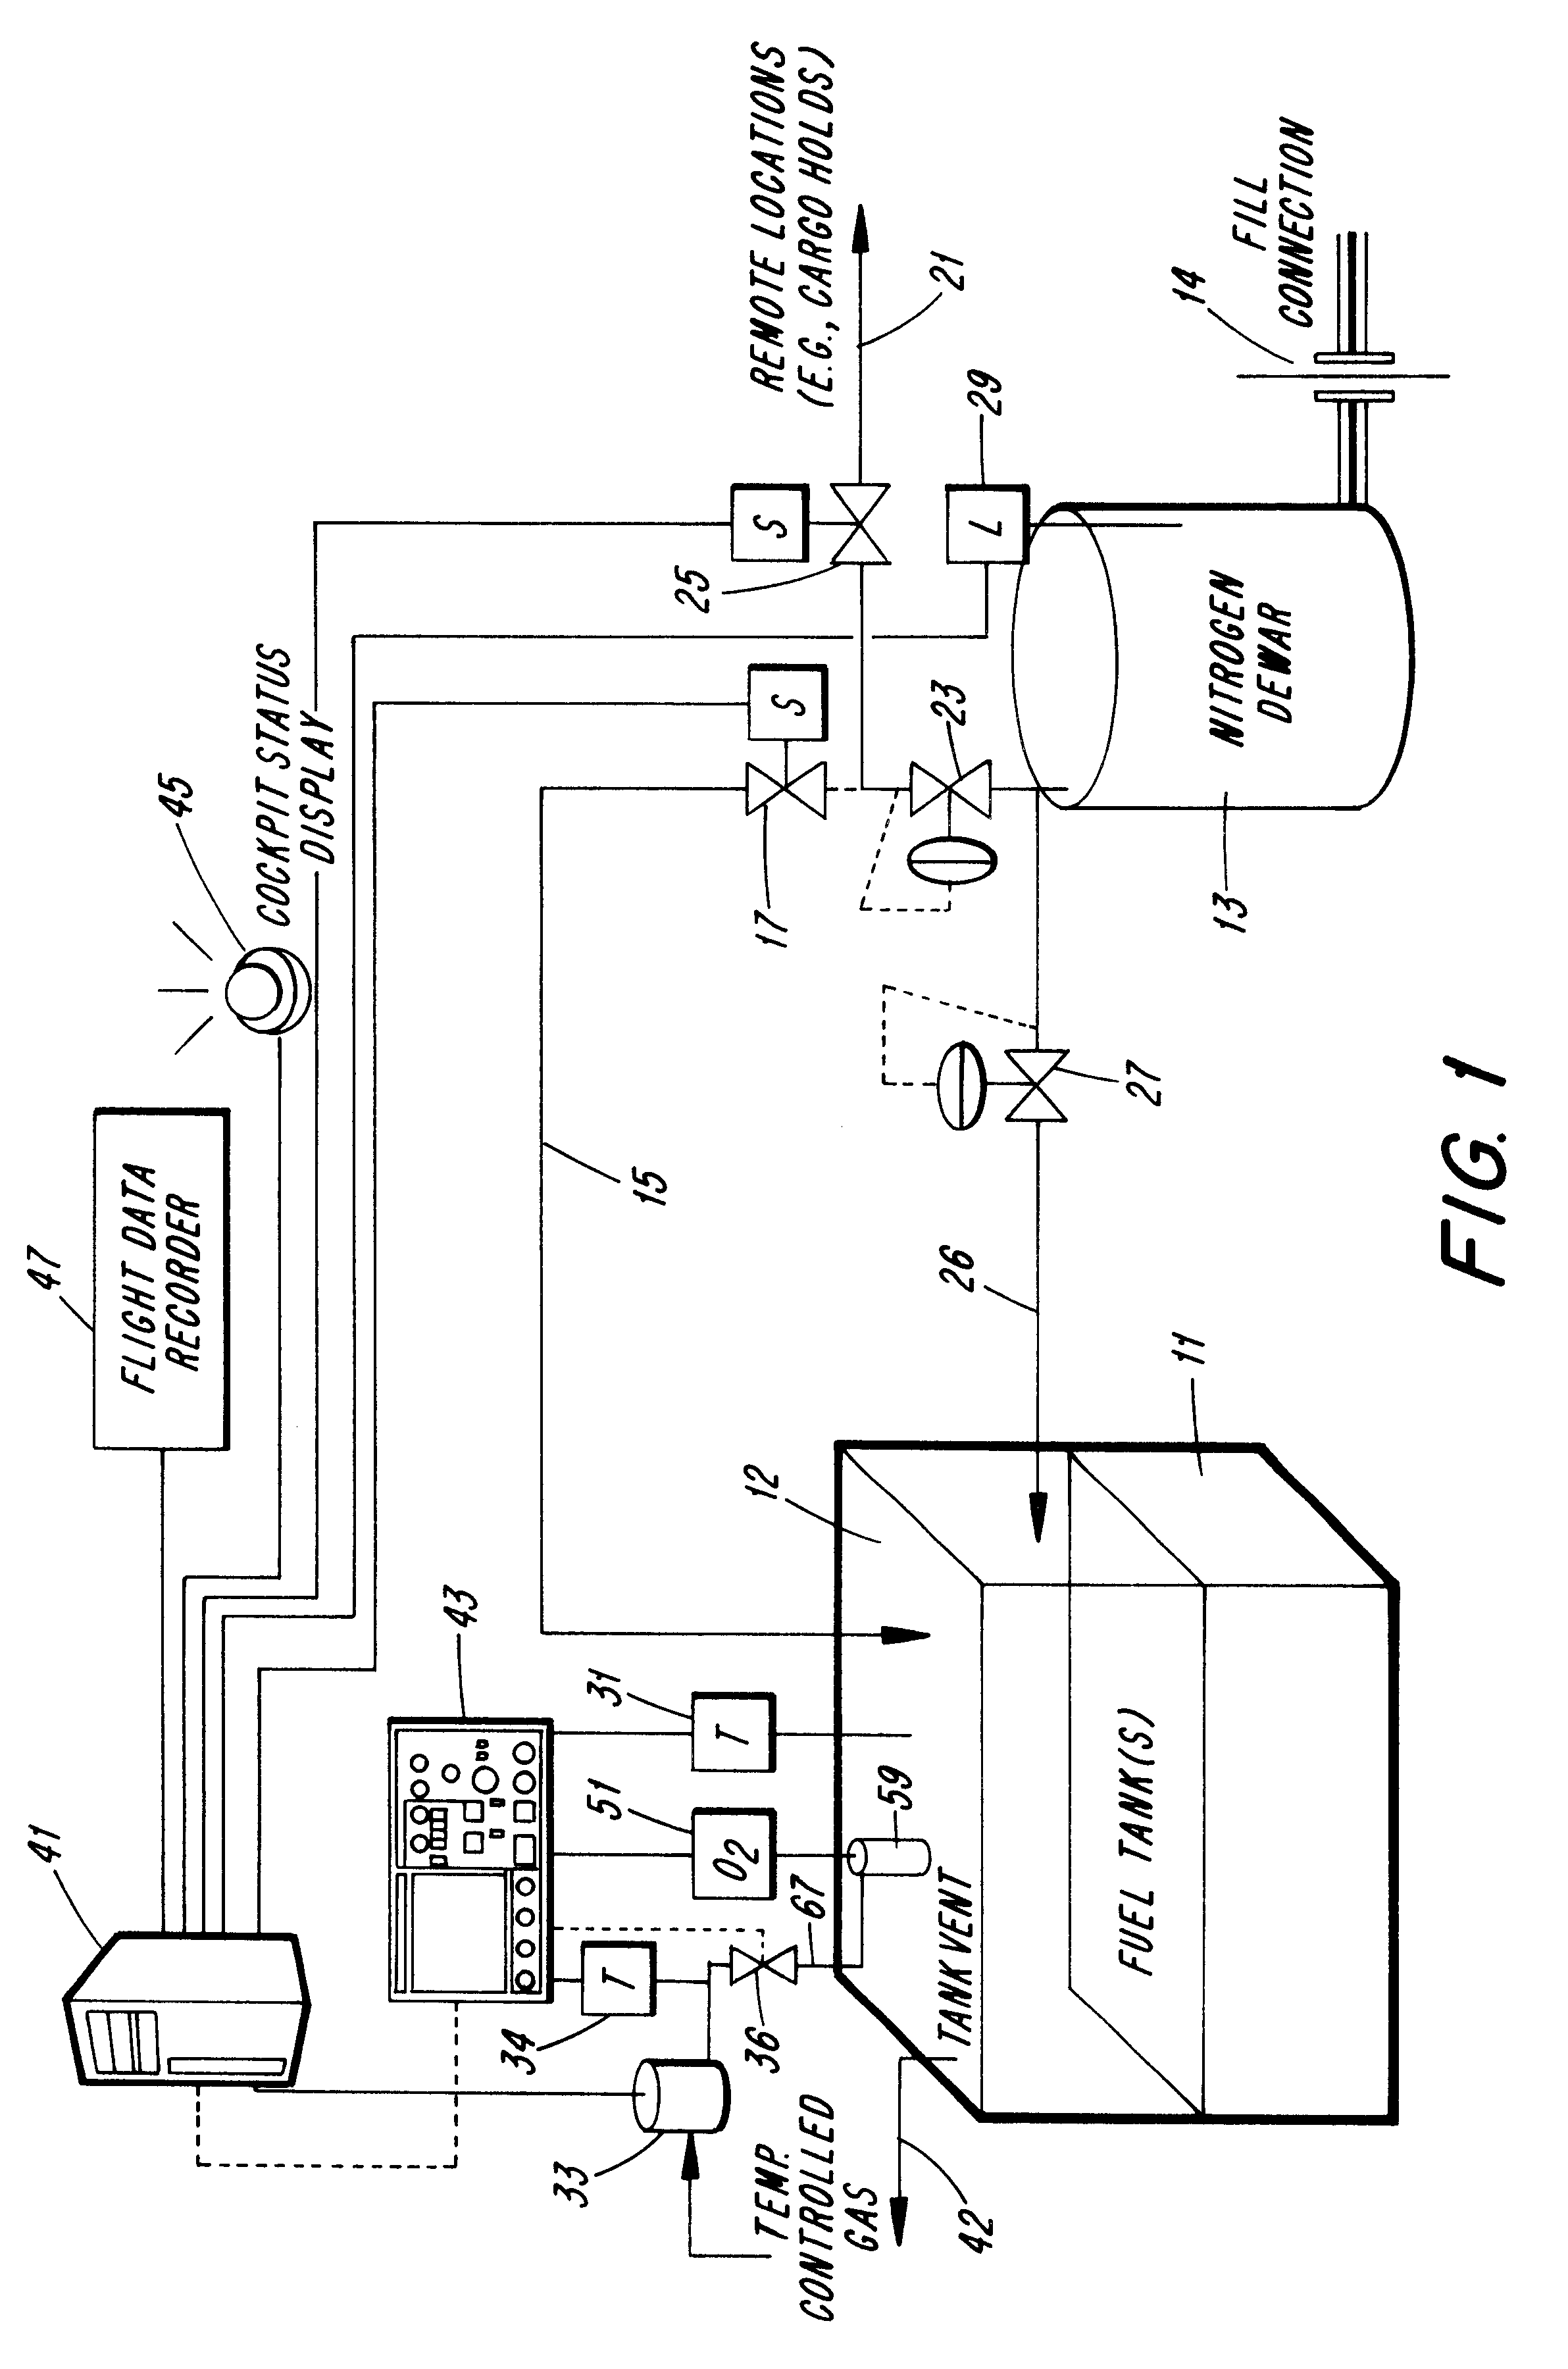 On-board fuel inerting system